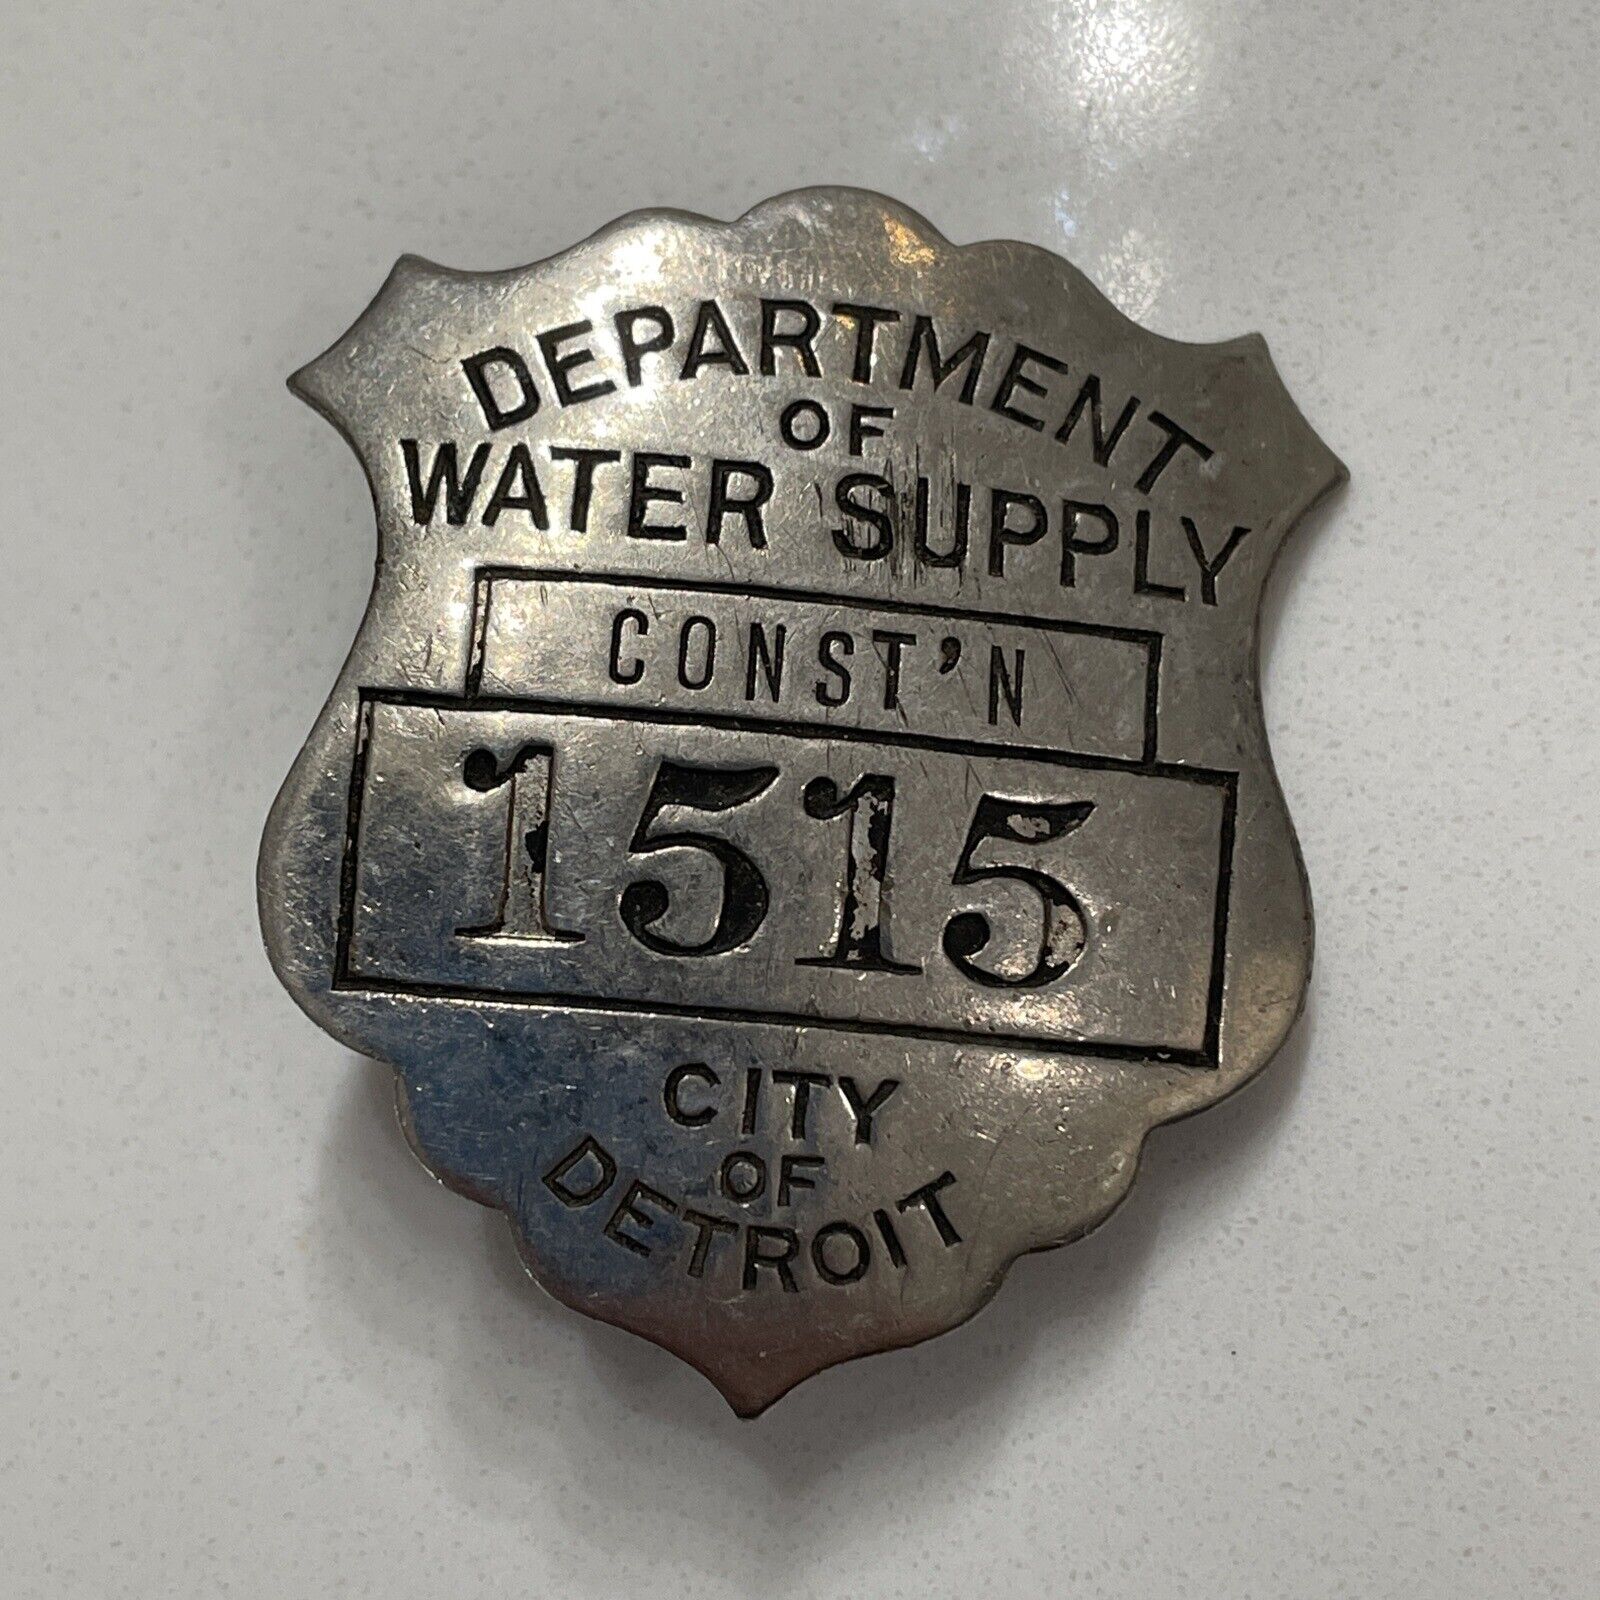 Vintage Rare City of Detroit Department of Water Supply Construction Badge